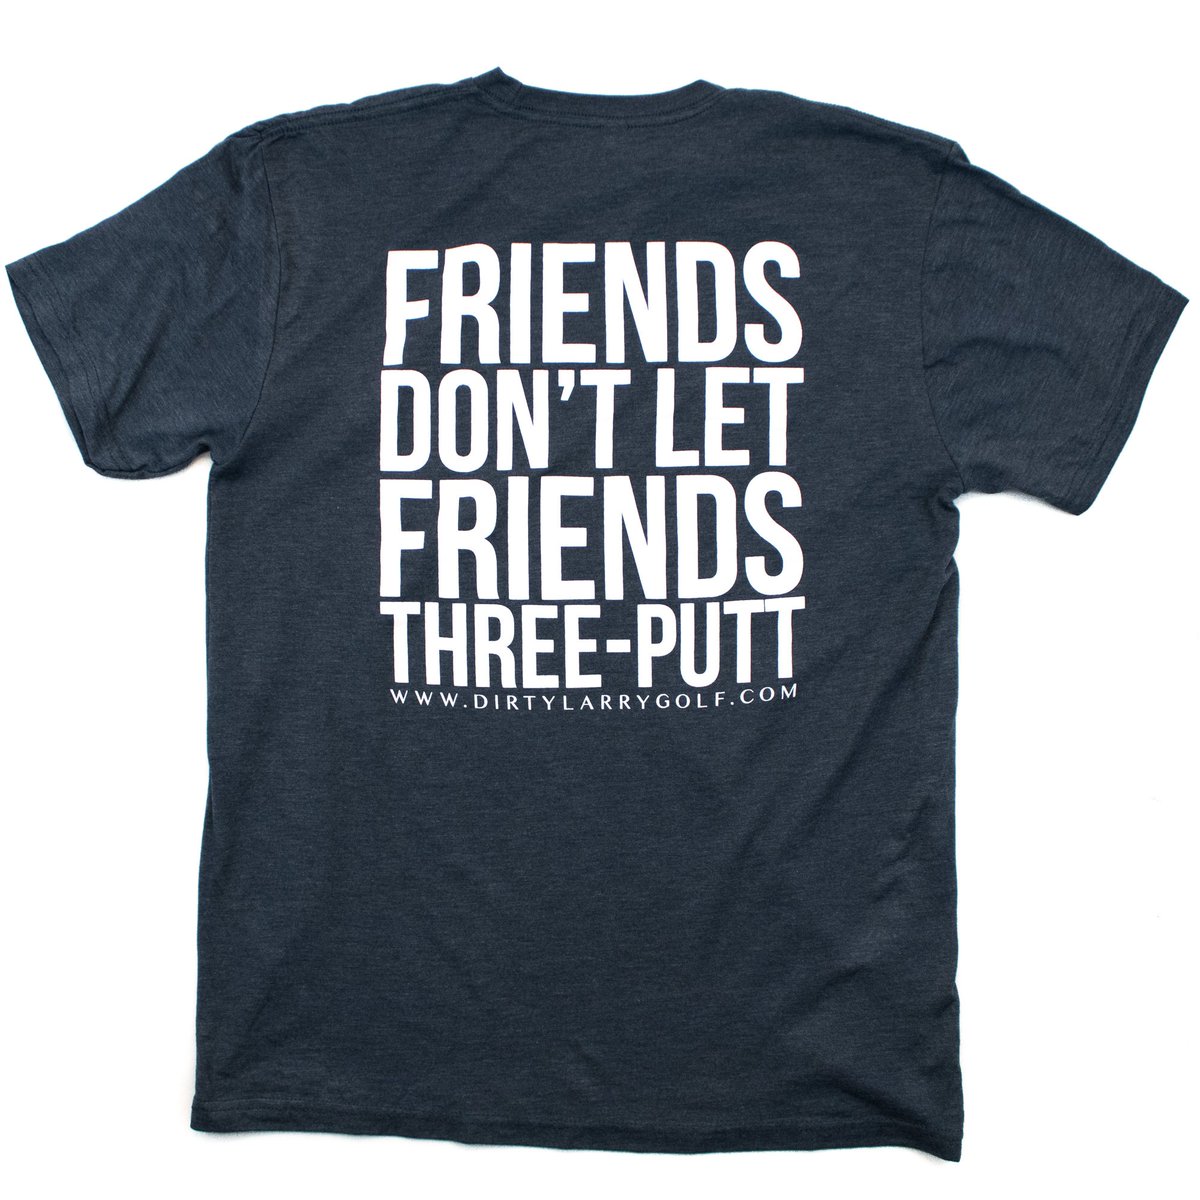 RETWEET TO WIN

It's a Tuesday tee day, which means we're hooking one lucky *follower* up with our infamous 'Friends Don't Let Friends Three-Putt' t-shirt. Just make sure you're following our account + hit that ♻️ button. #golfchat #golfgiveaway